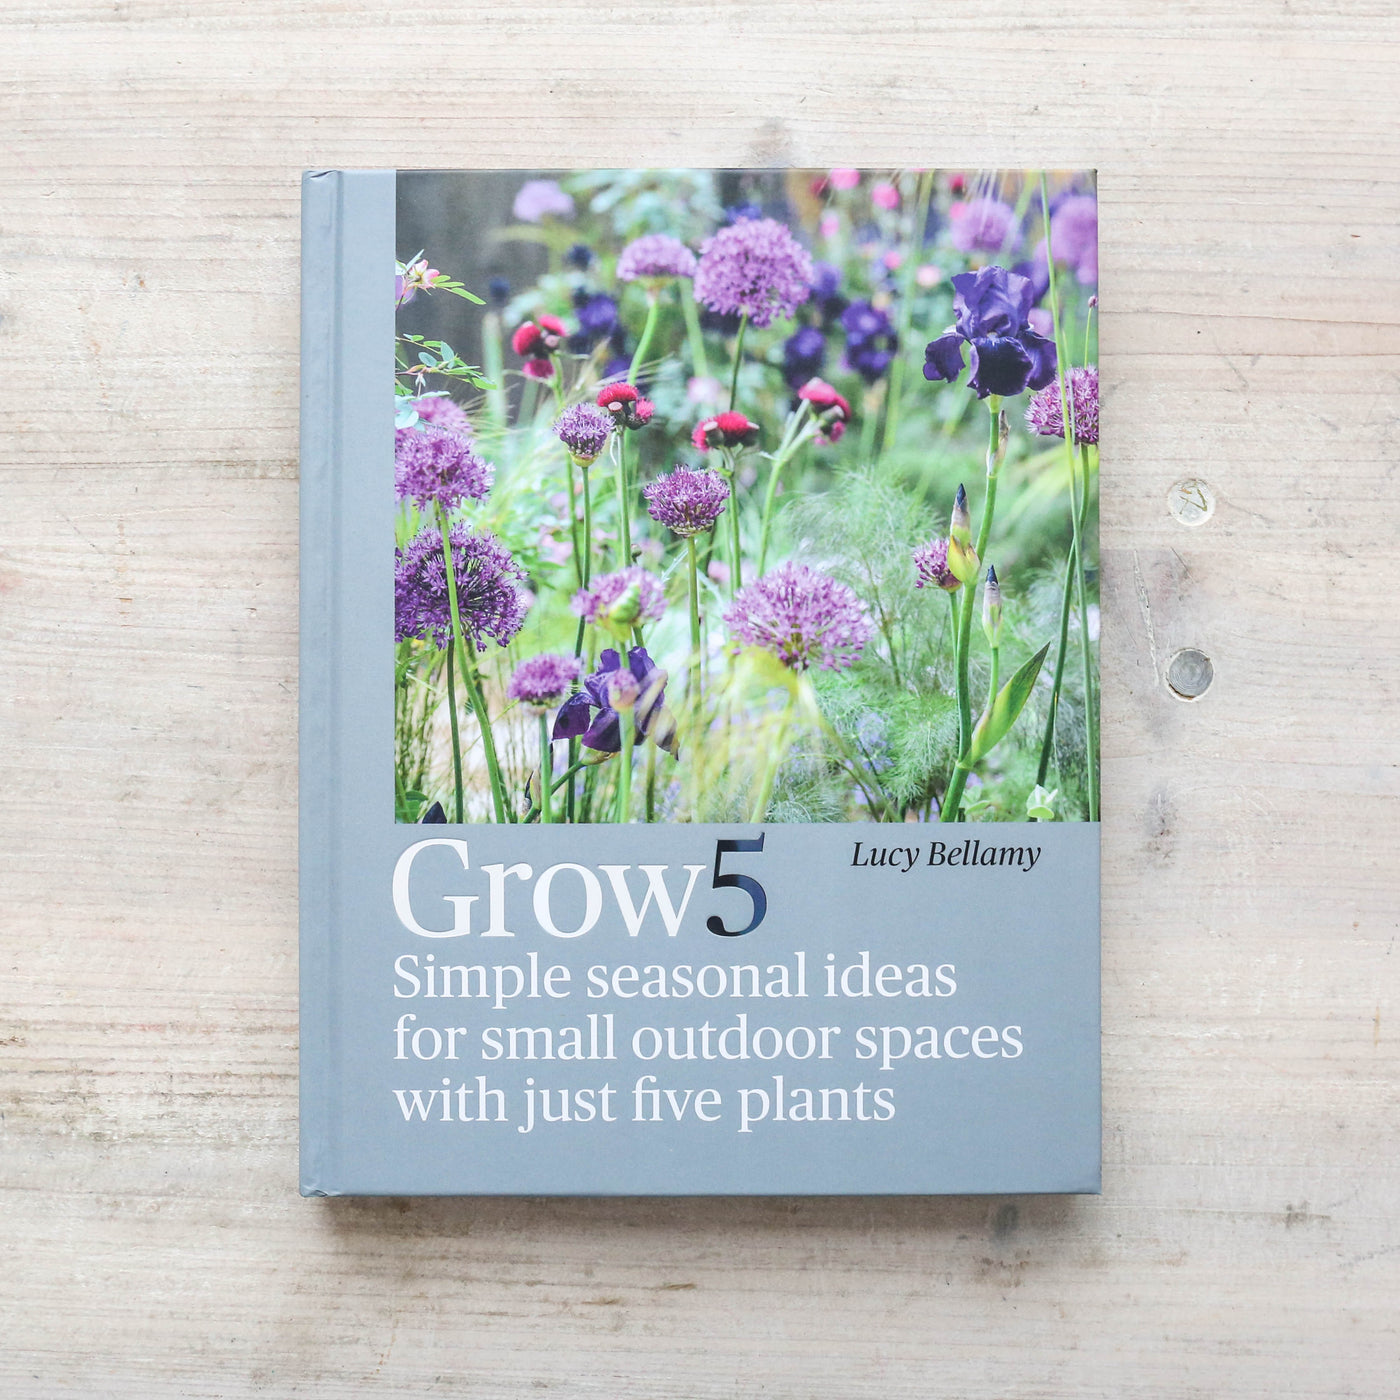 Grow 5 : Simple seasonal ideas for small outdoor spaces with just five plants